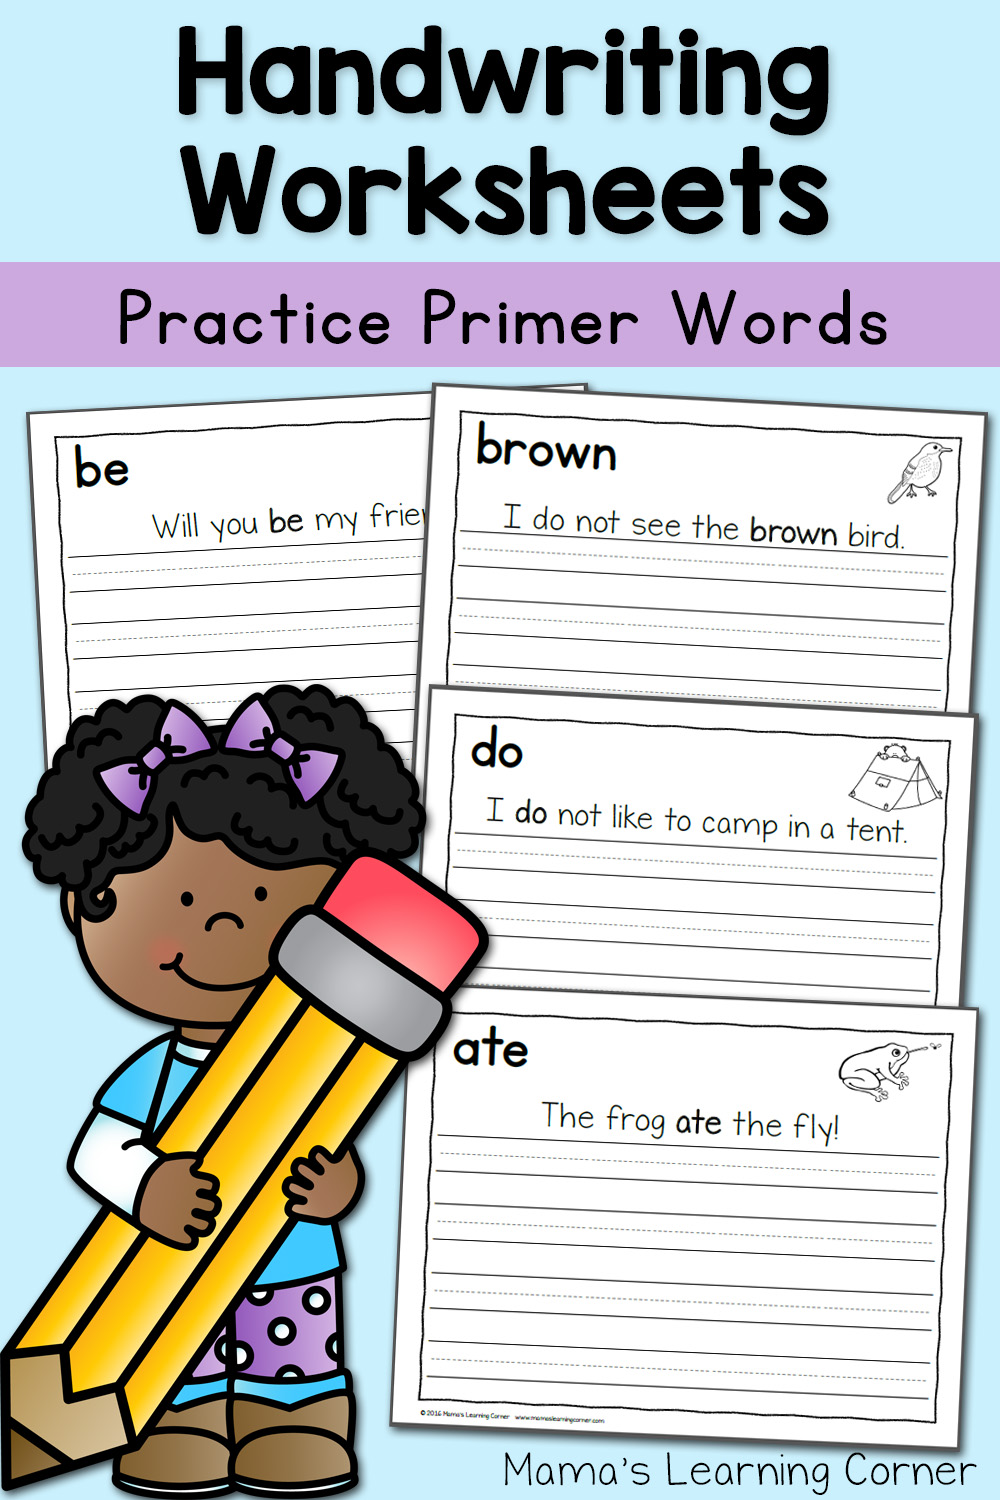 Handwriting Worksheets for Kids: Dolch Primer Words! - Mamas Learning